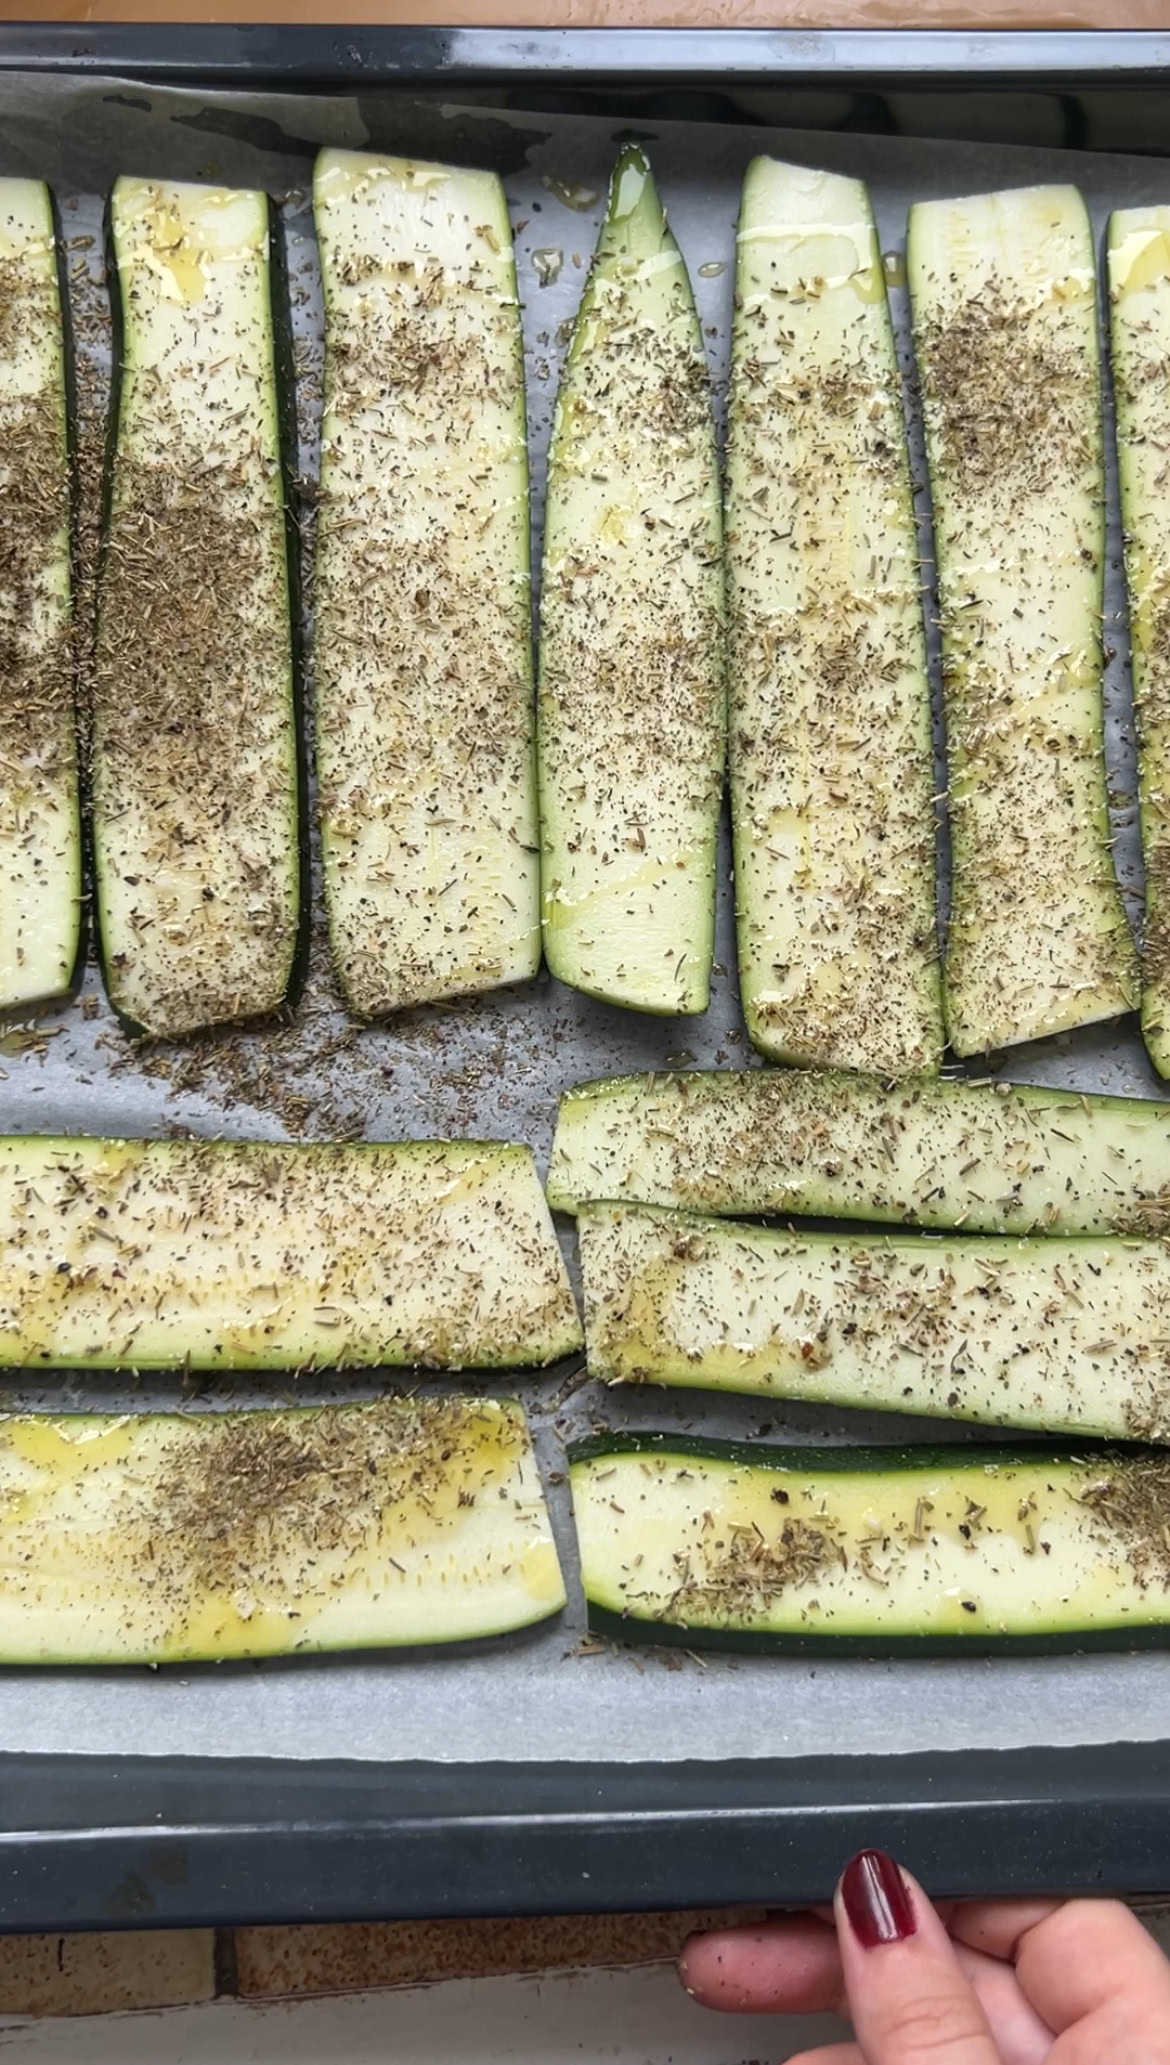 Seasoned zucchini slices, placed on a baking sheet lined with parchment paper.